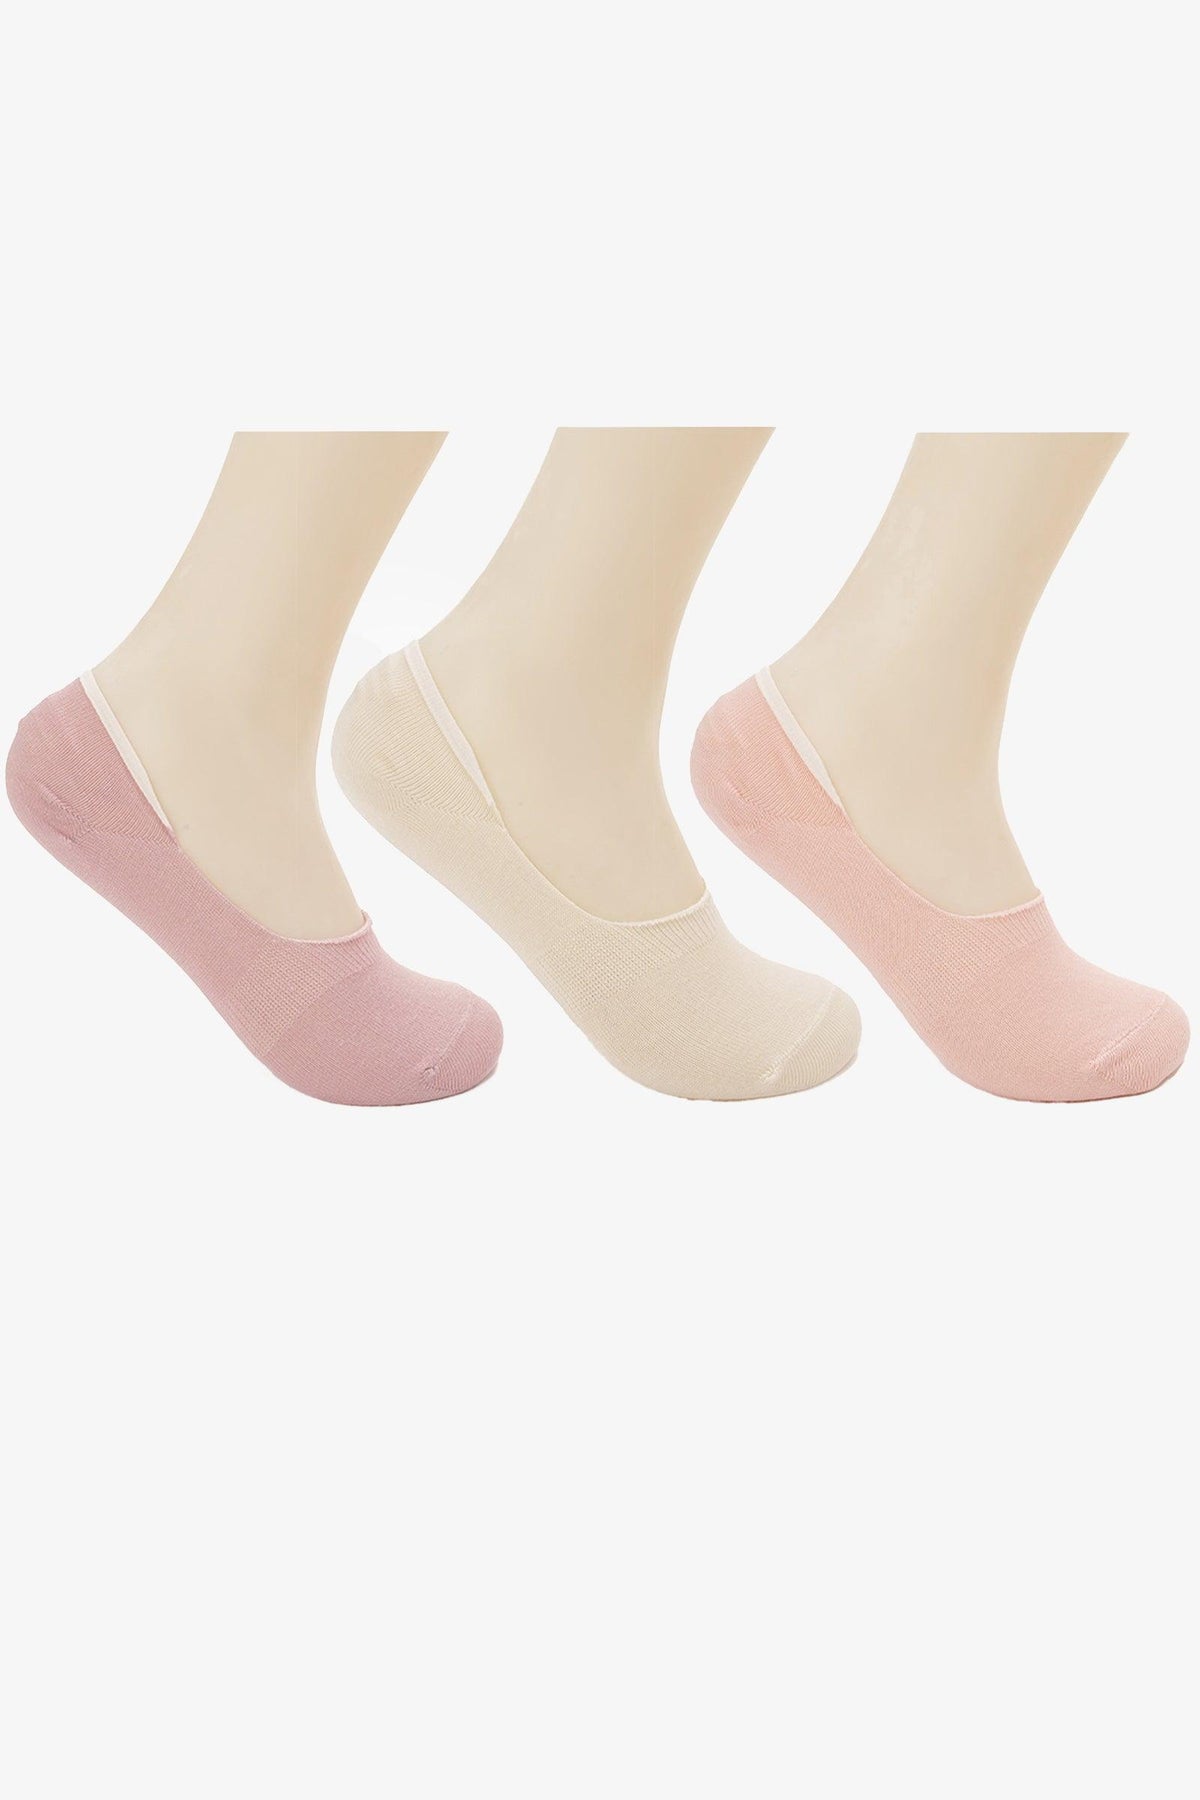 Cotton Invisible Socks - 3 Pairs